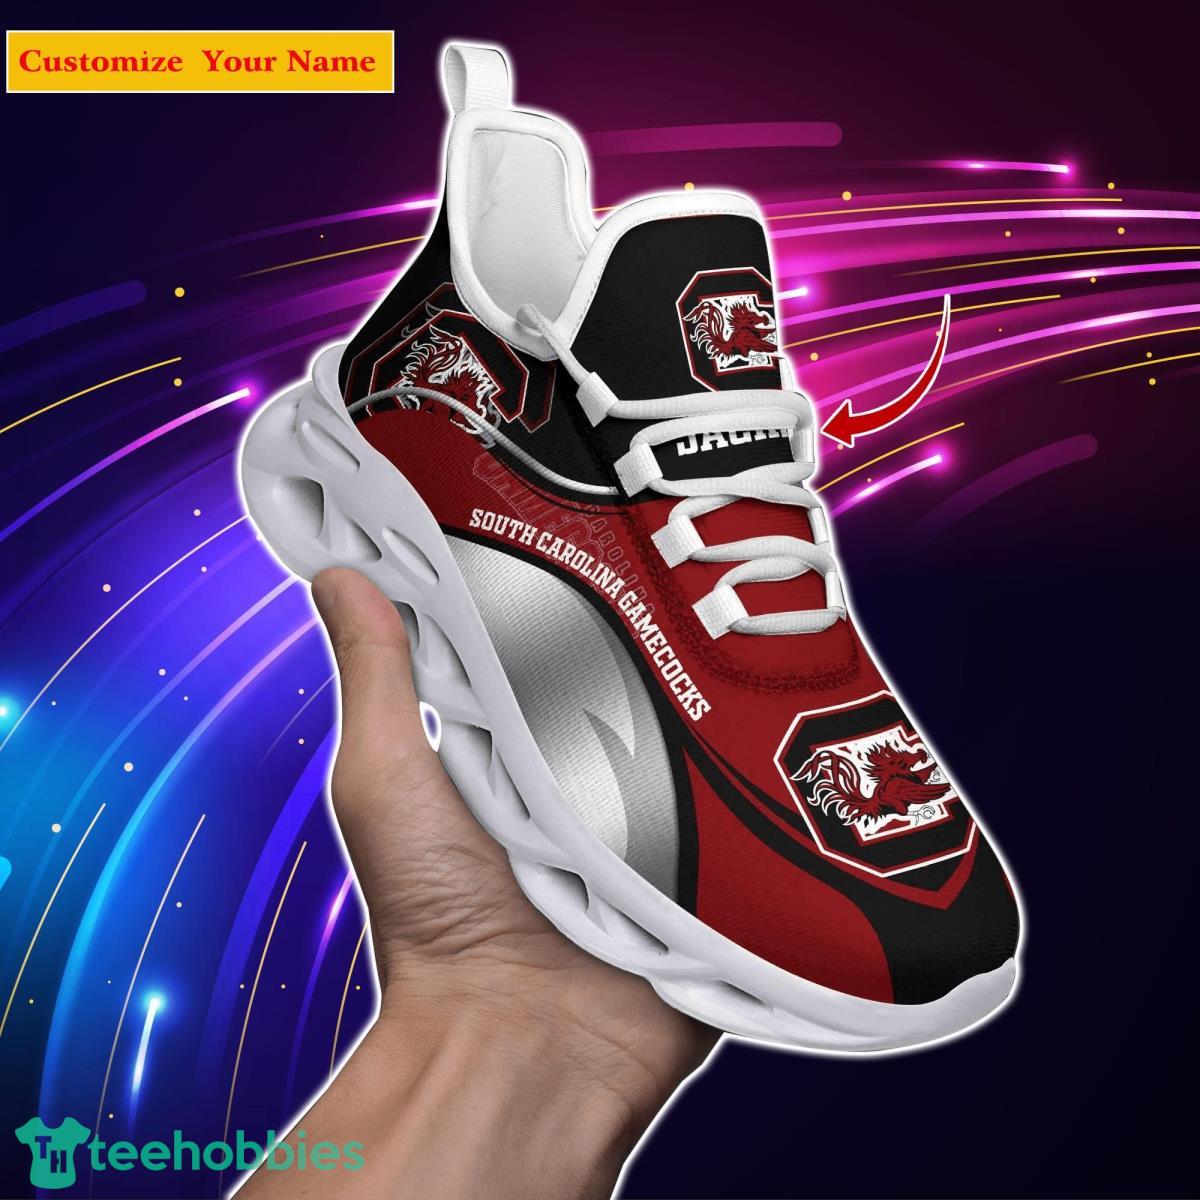 South Carolina Gamecocks NCAA1 Custom Name Max Soul Shoes Unique Gift For Men Women Fans Product Photo 1